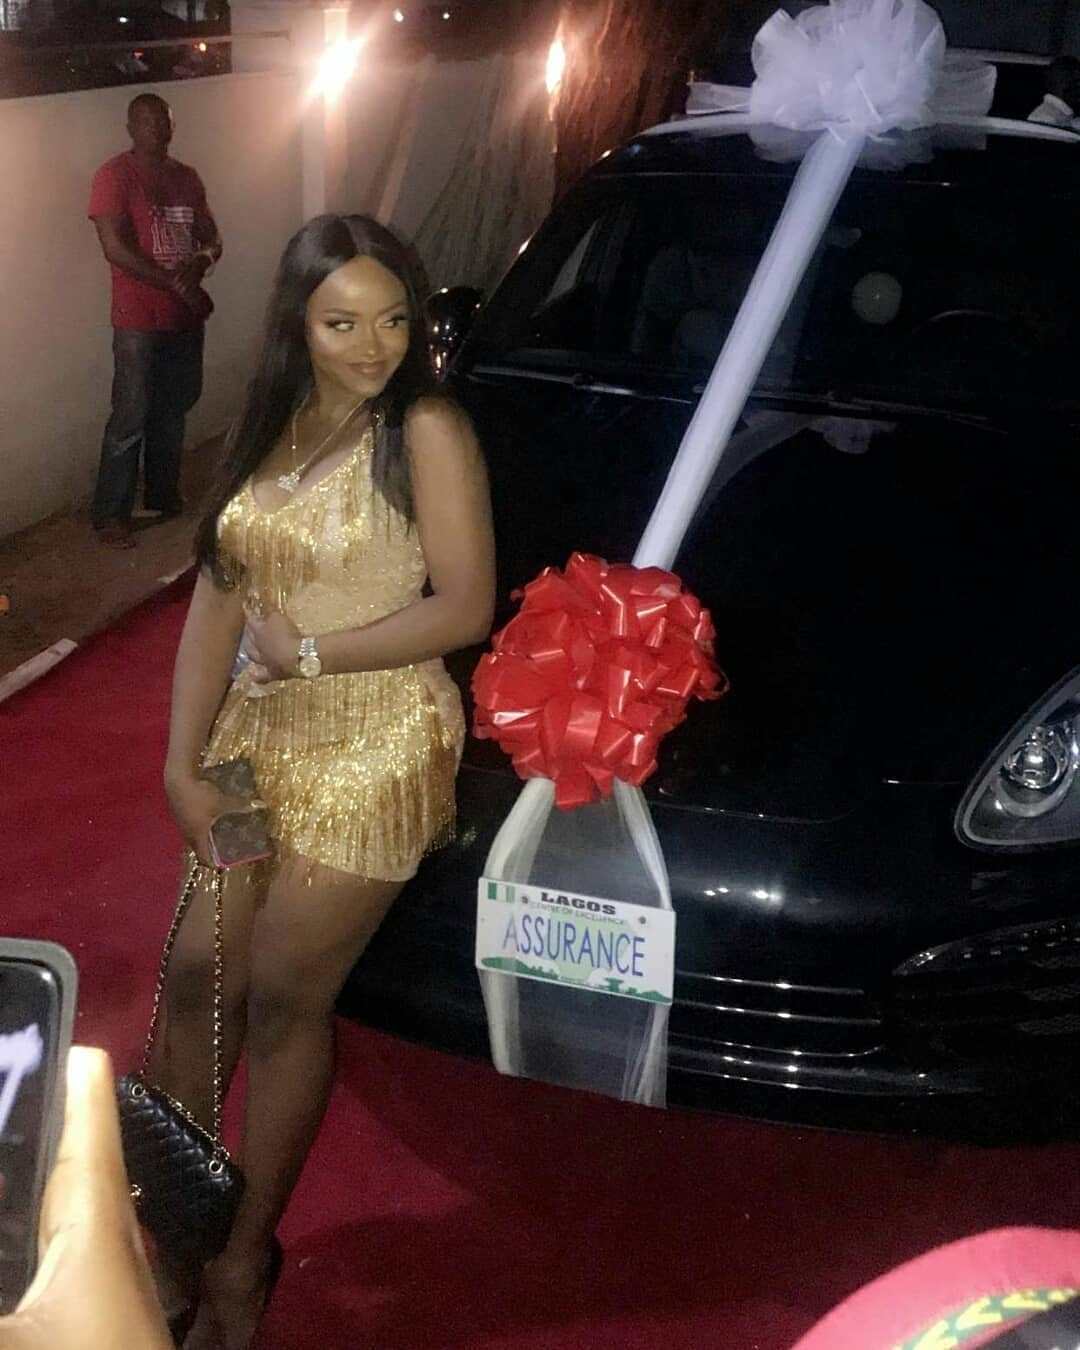 Trolls come for Sophia Momodu after Davido gifts Chioma a Porsche